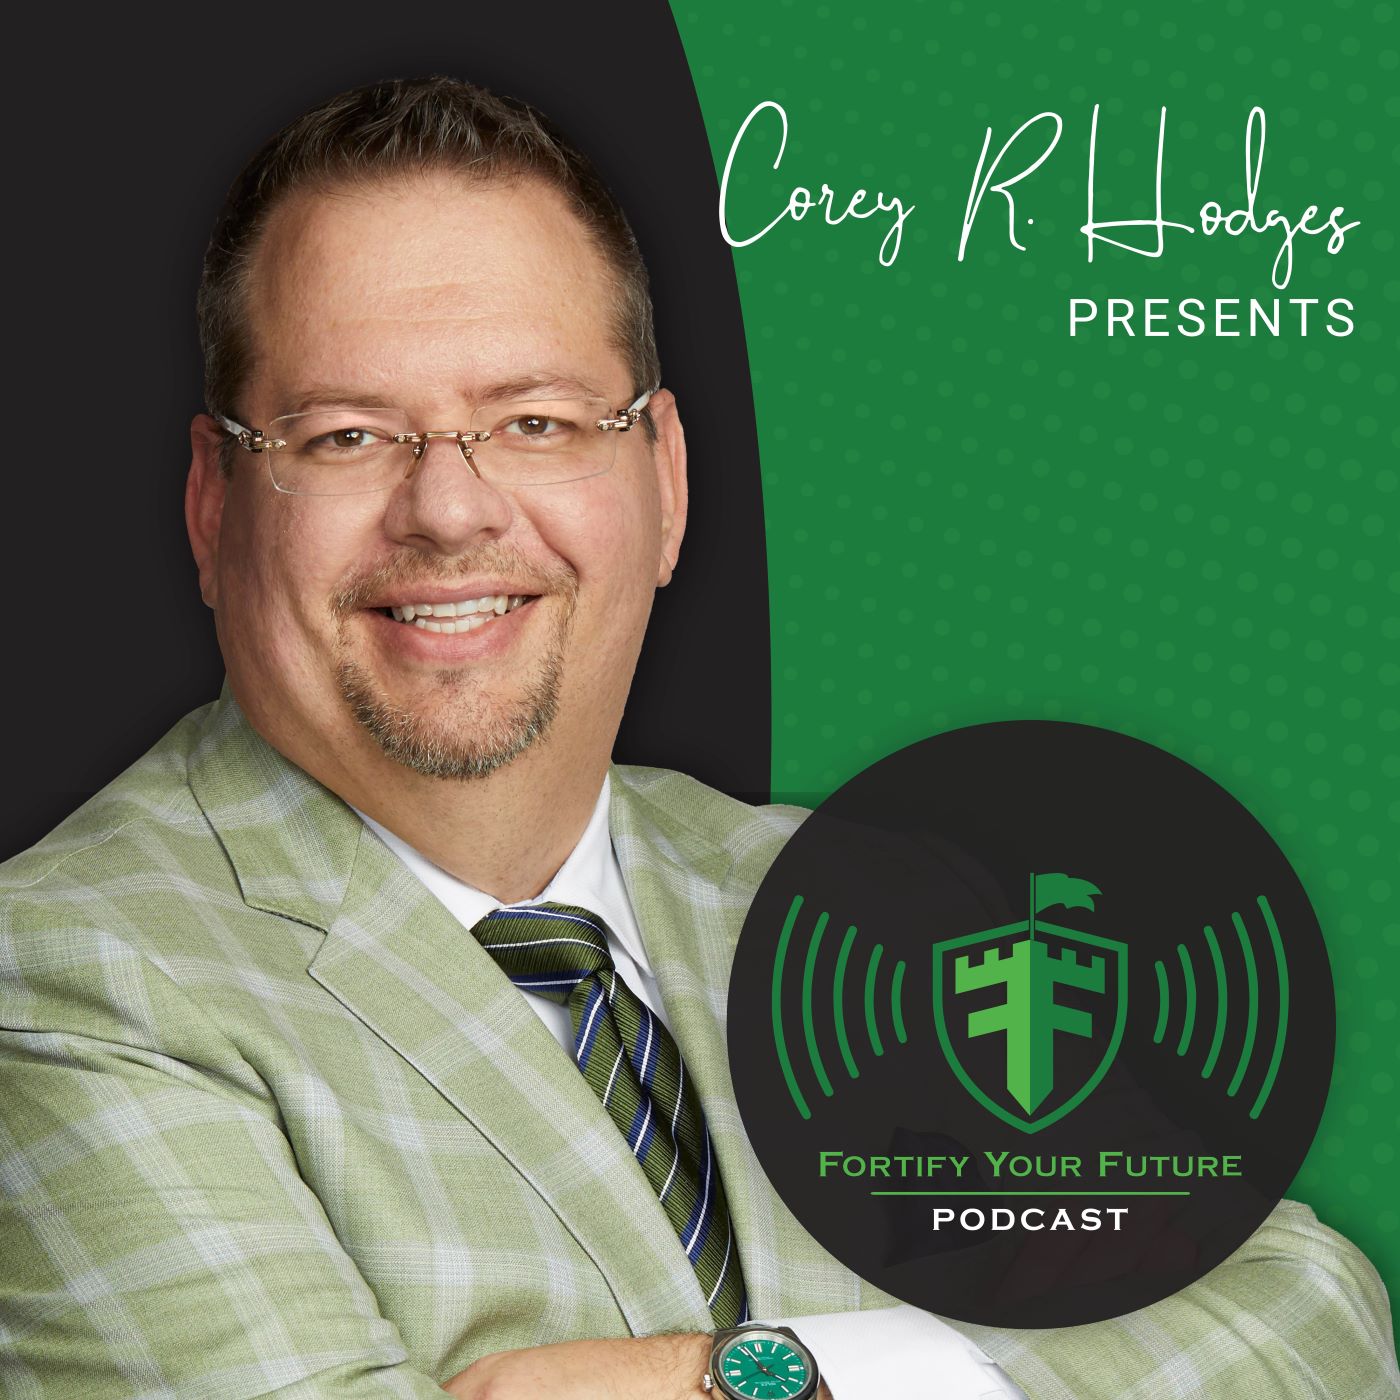 Fortify Your Future Radio!